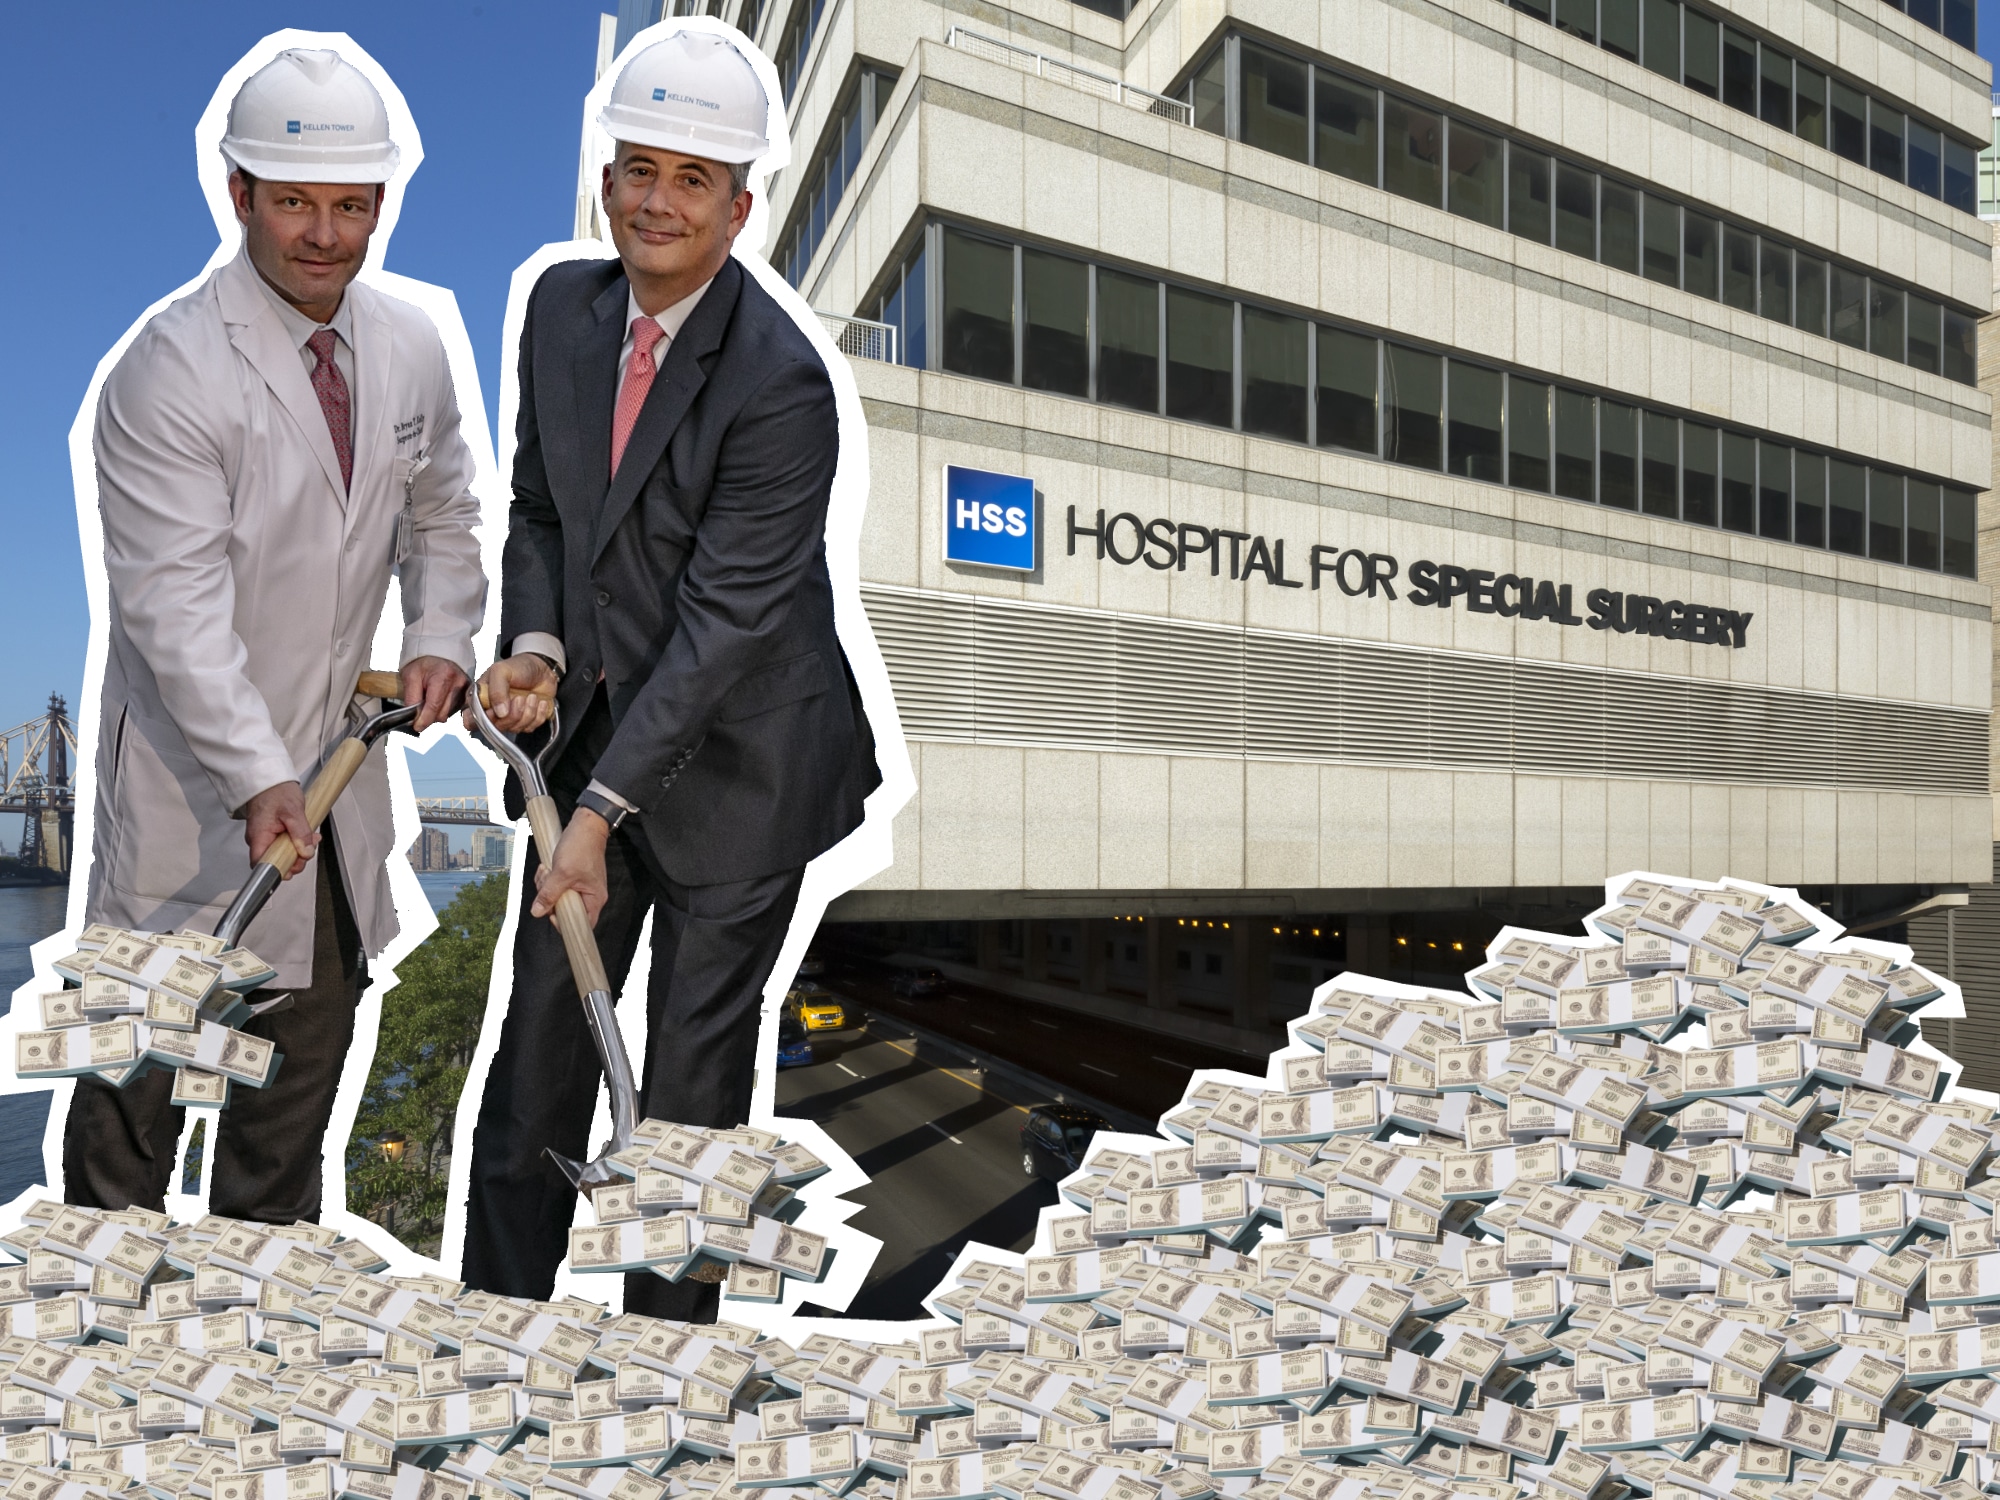 HSS surgeon-in-chief Bryan T. Kelly and CEO Louis Shapiro were paid millions while the hospital received taxpayer dollars | Bespoke Films, Envato Elements, Composite by Upper East Site